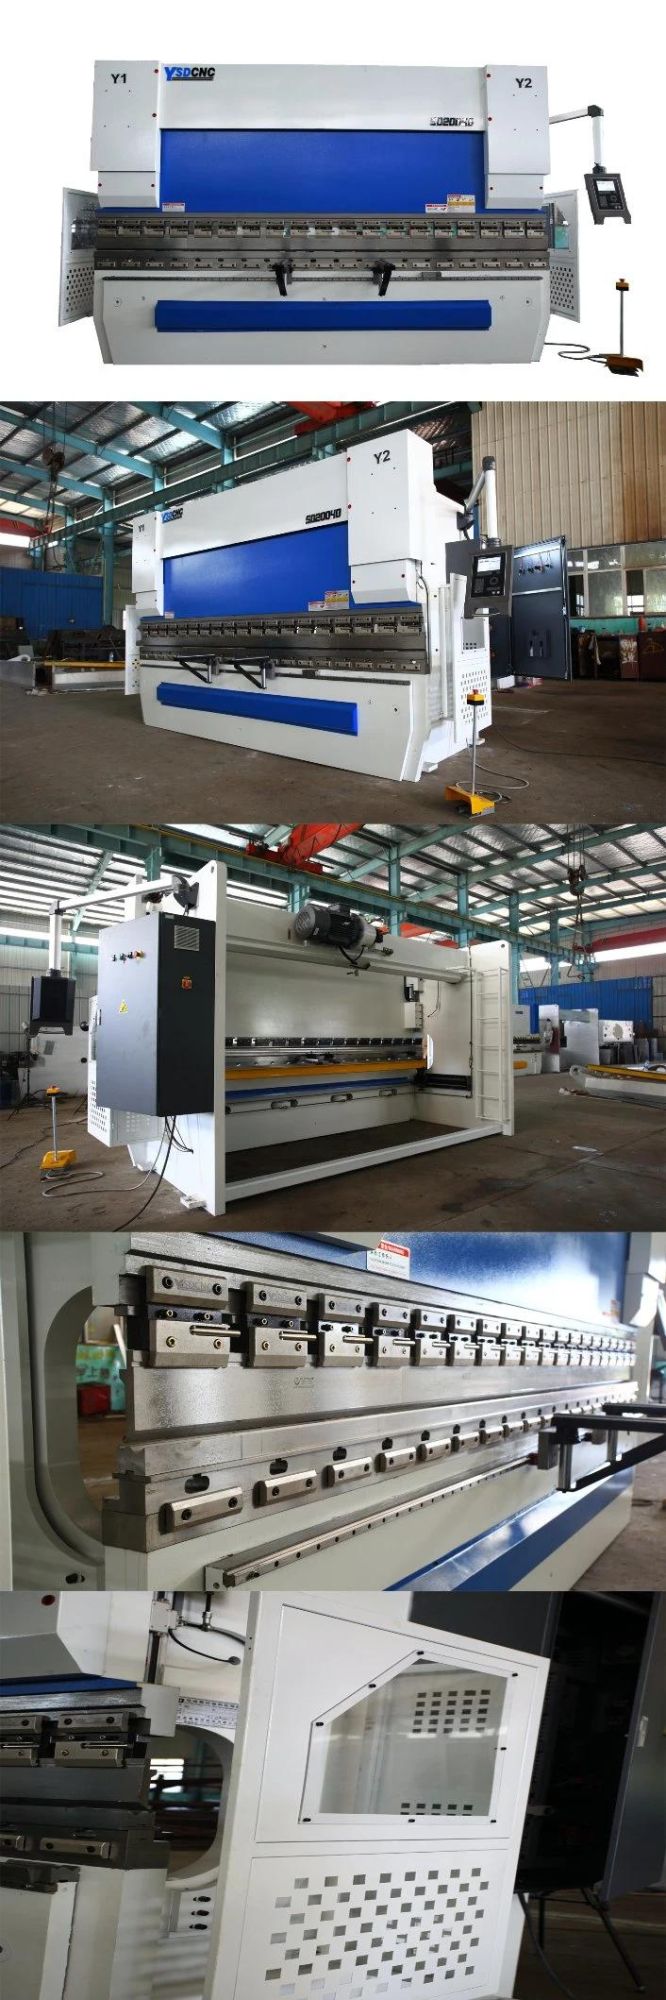 CNC Automatic Press Brake Tooling with Sevro Motor